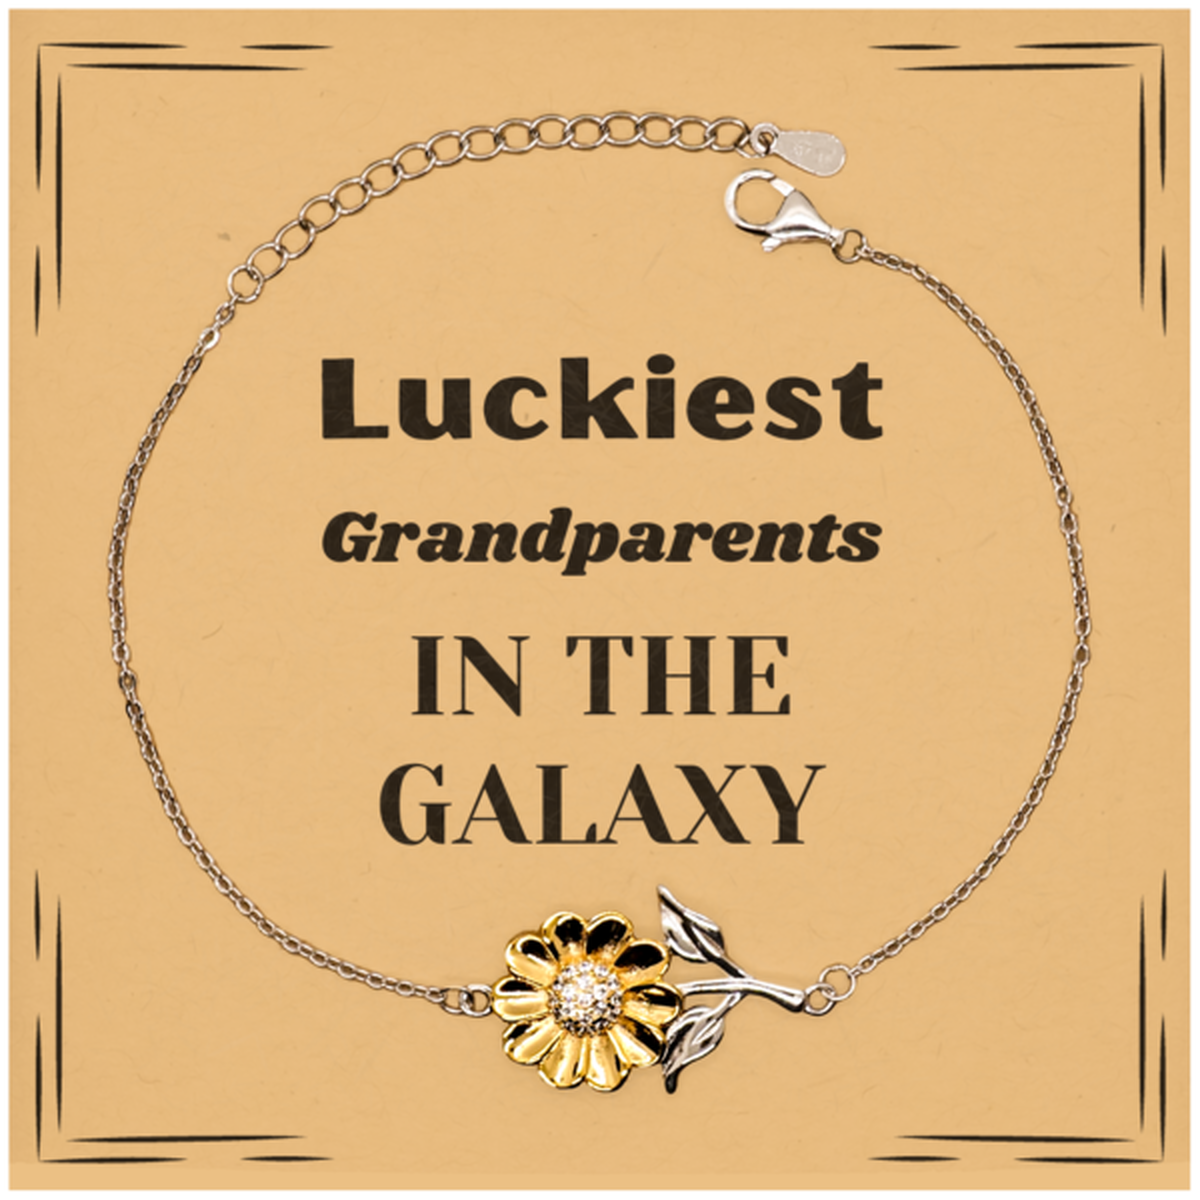 Luckiest Grandparents in the Galaxy, To My Grandparents Message Card Gifts, Christmas Grandparents Sunflower Bracelet Gifts, X-mas Birthday Unique Gifts For Grandparents Men Women